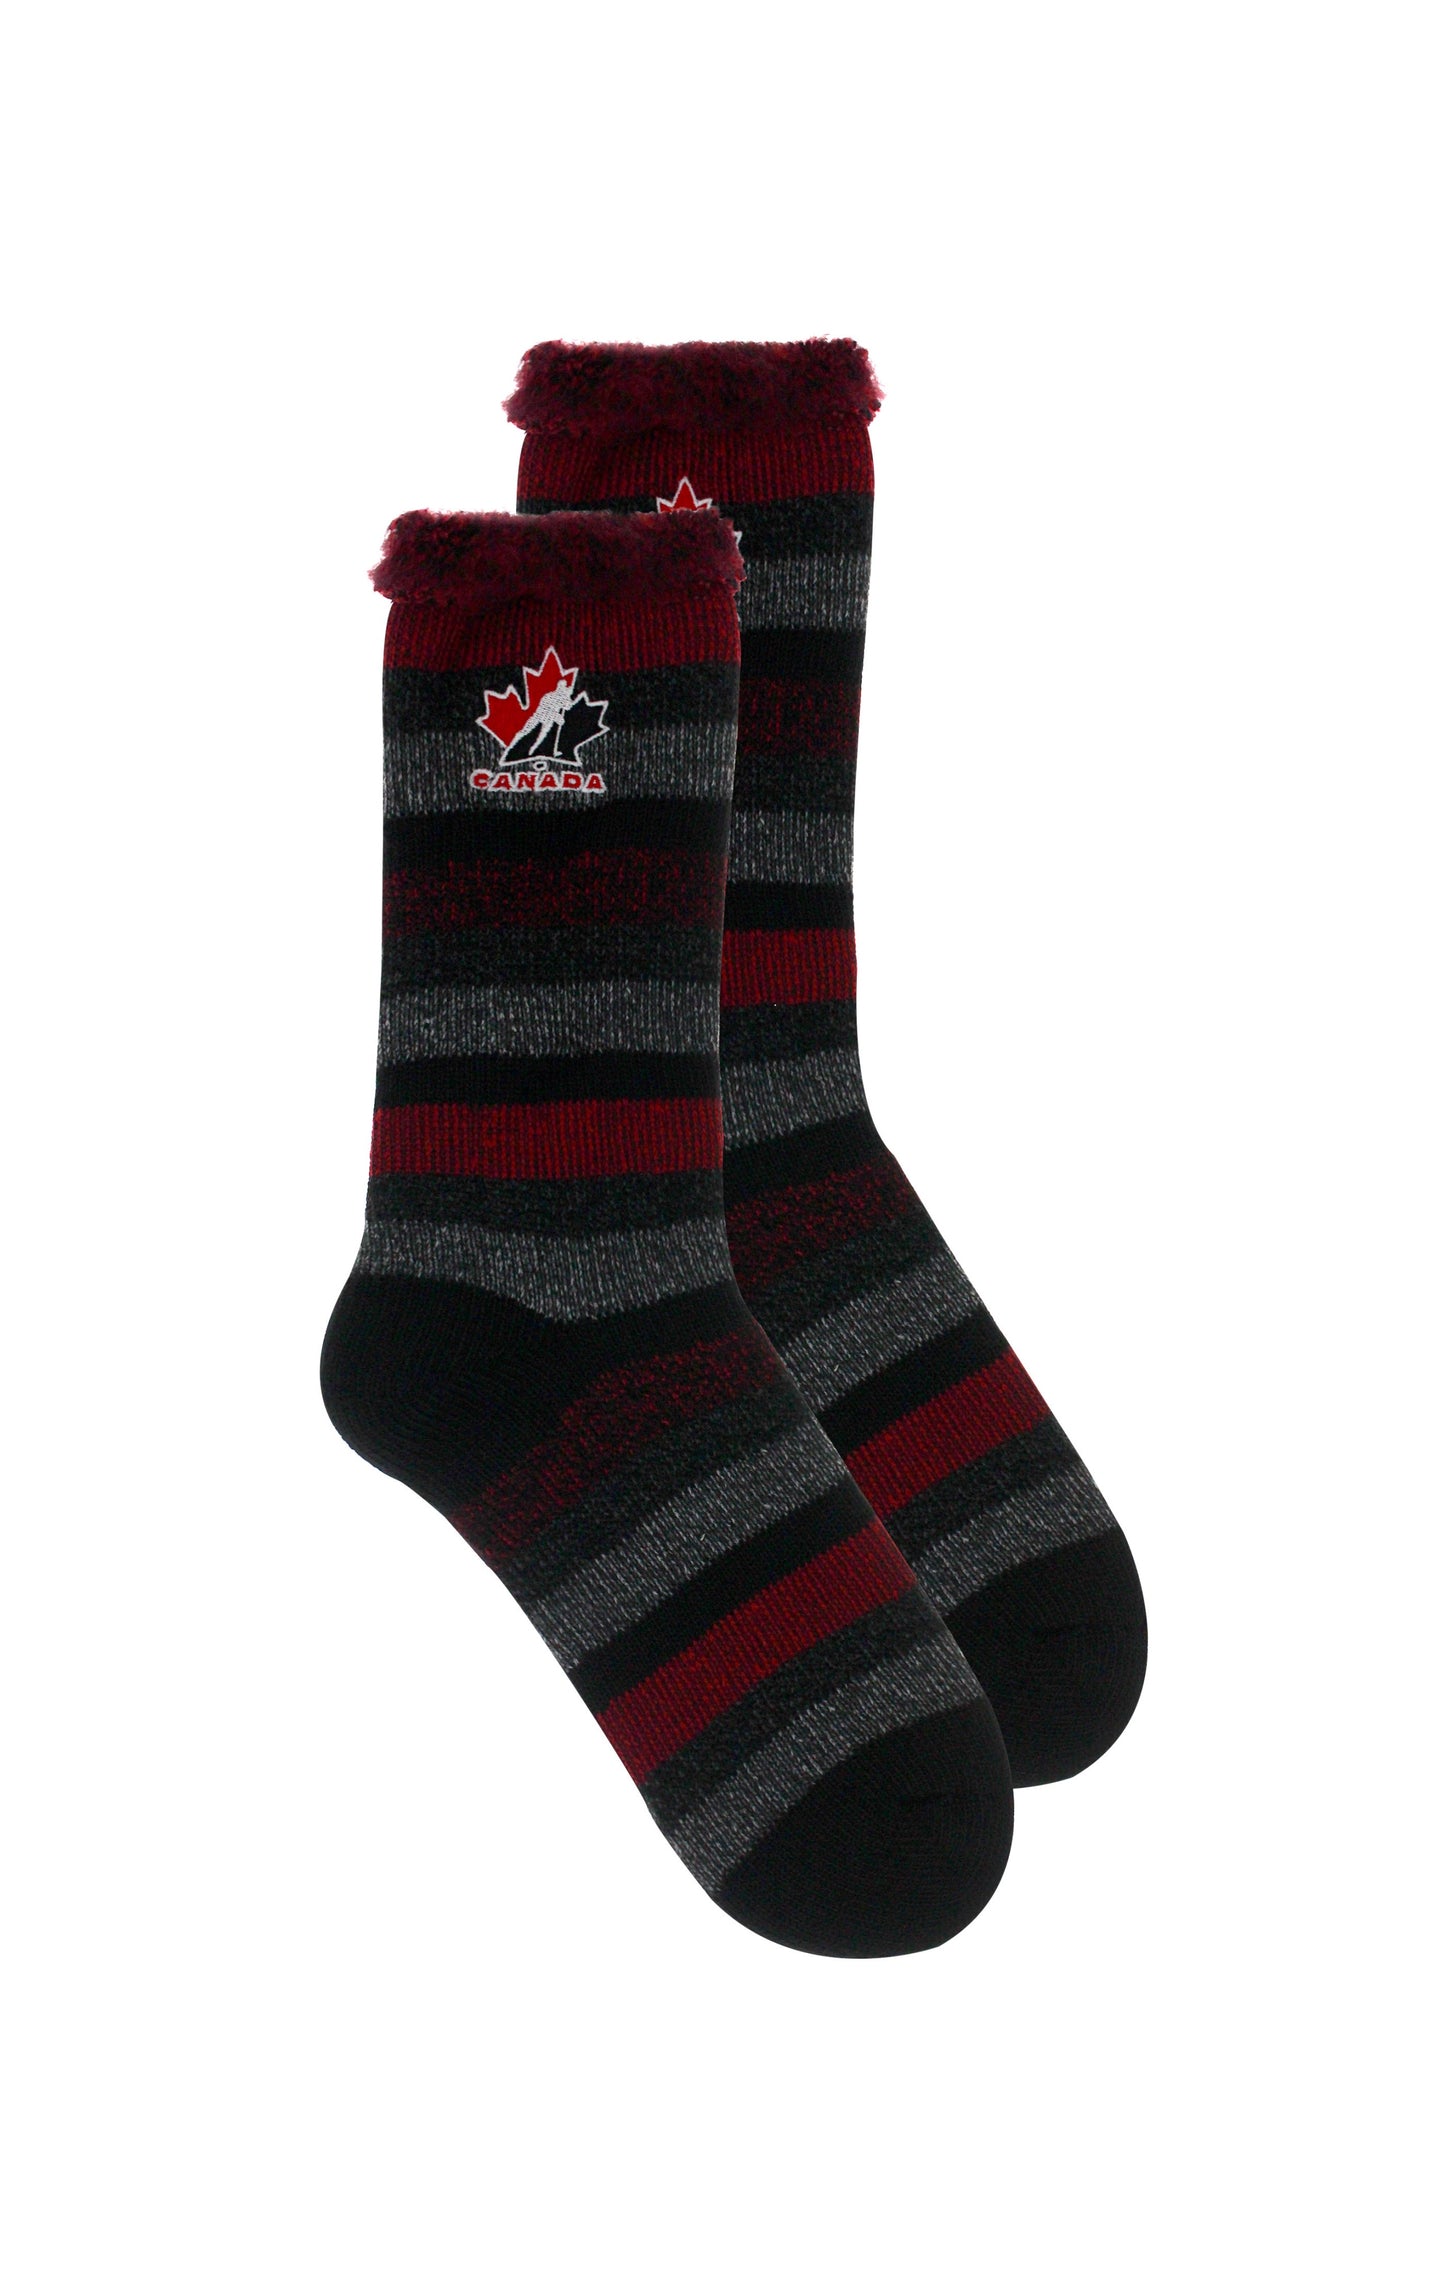 Hockey Canada Men's Thermal Crew Socks With Embroidery